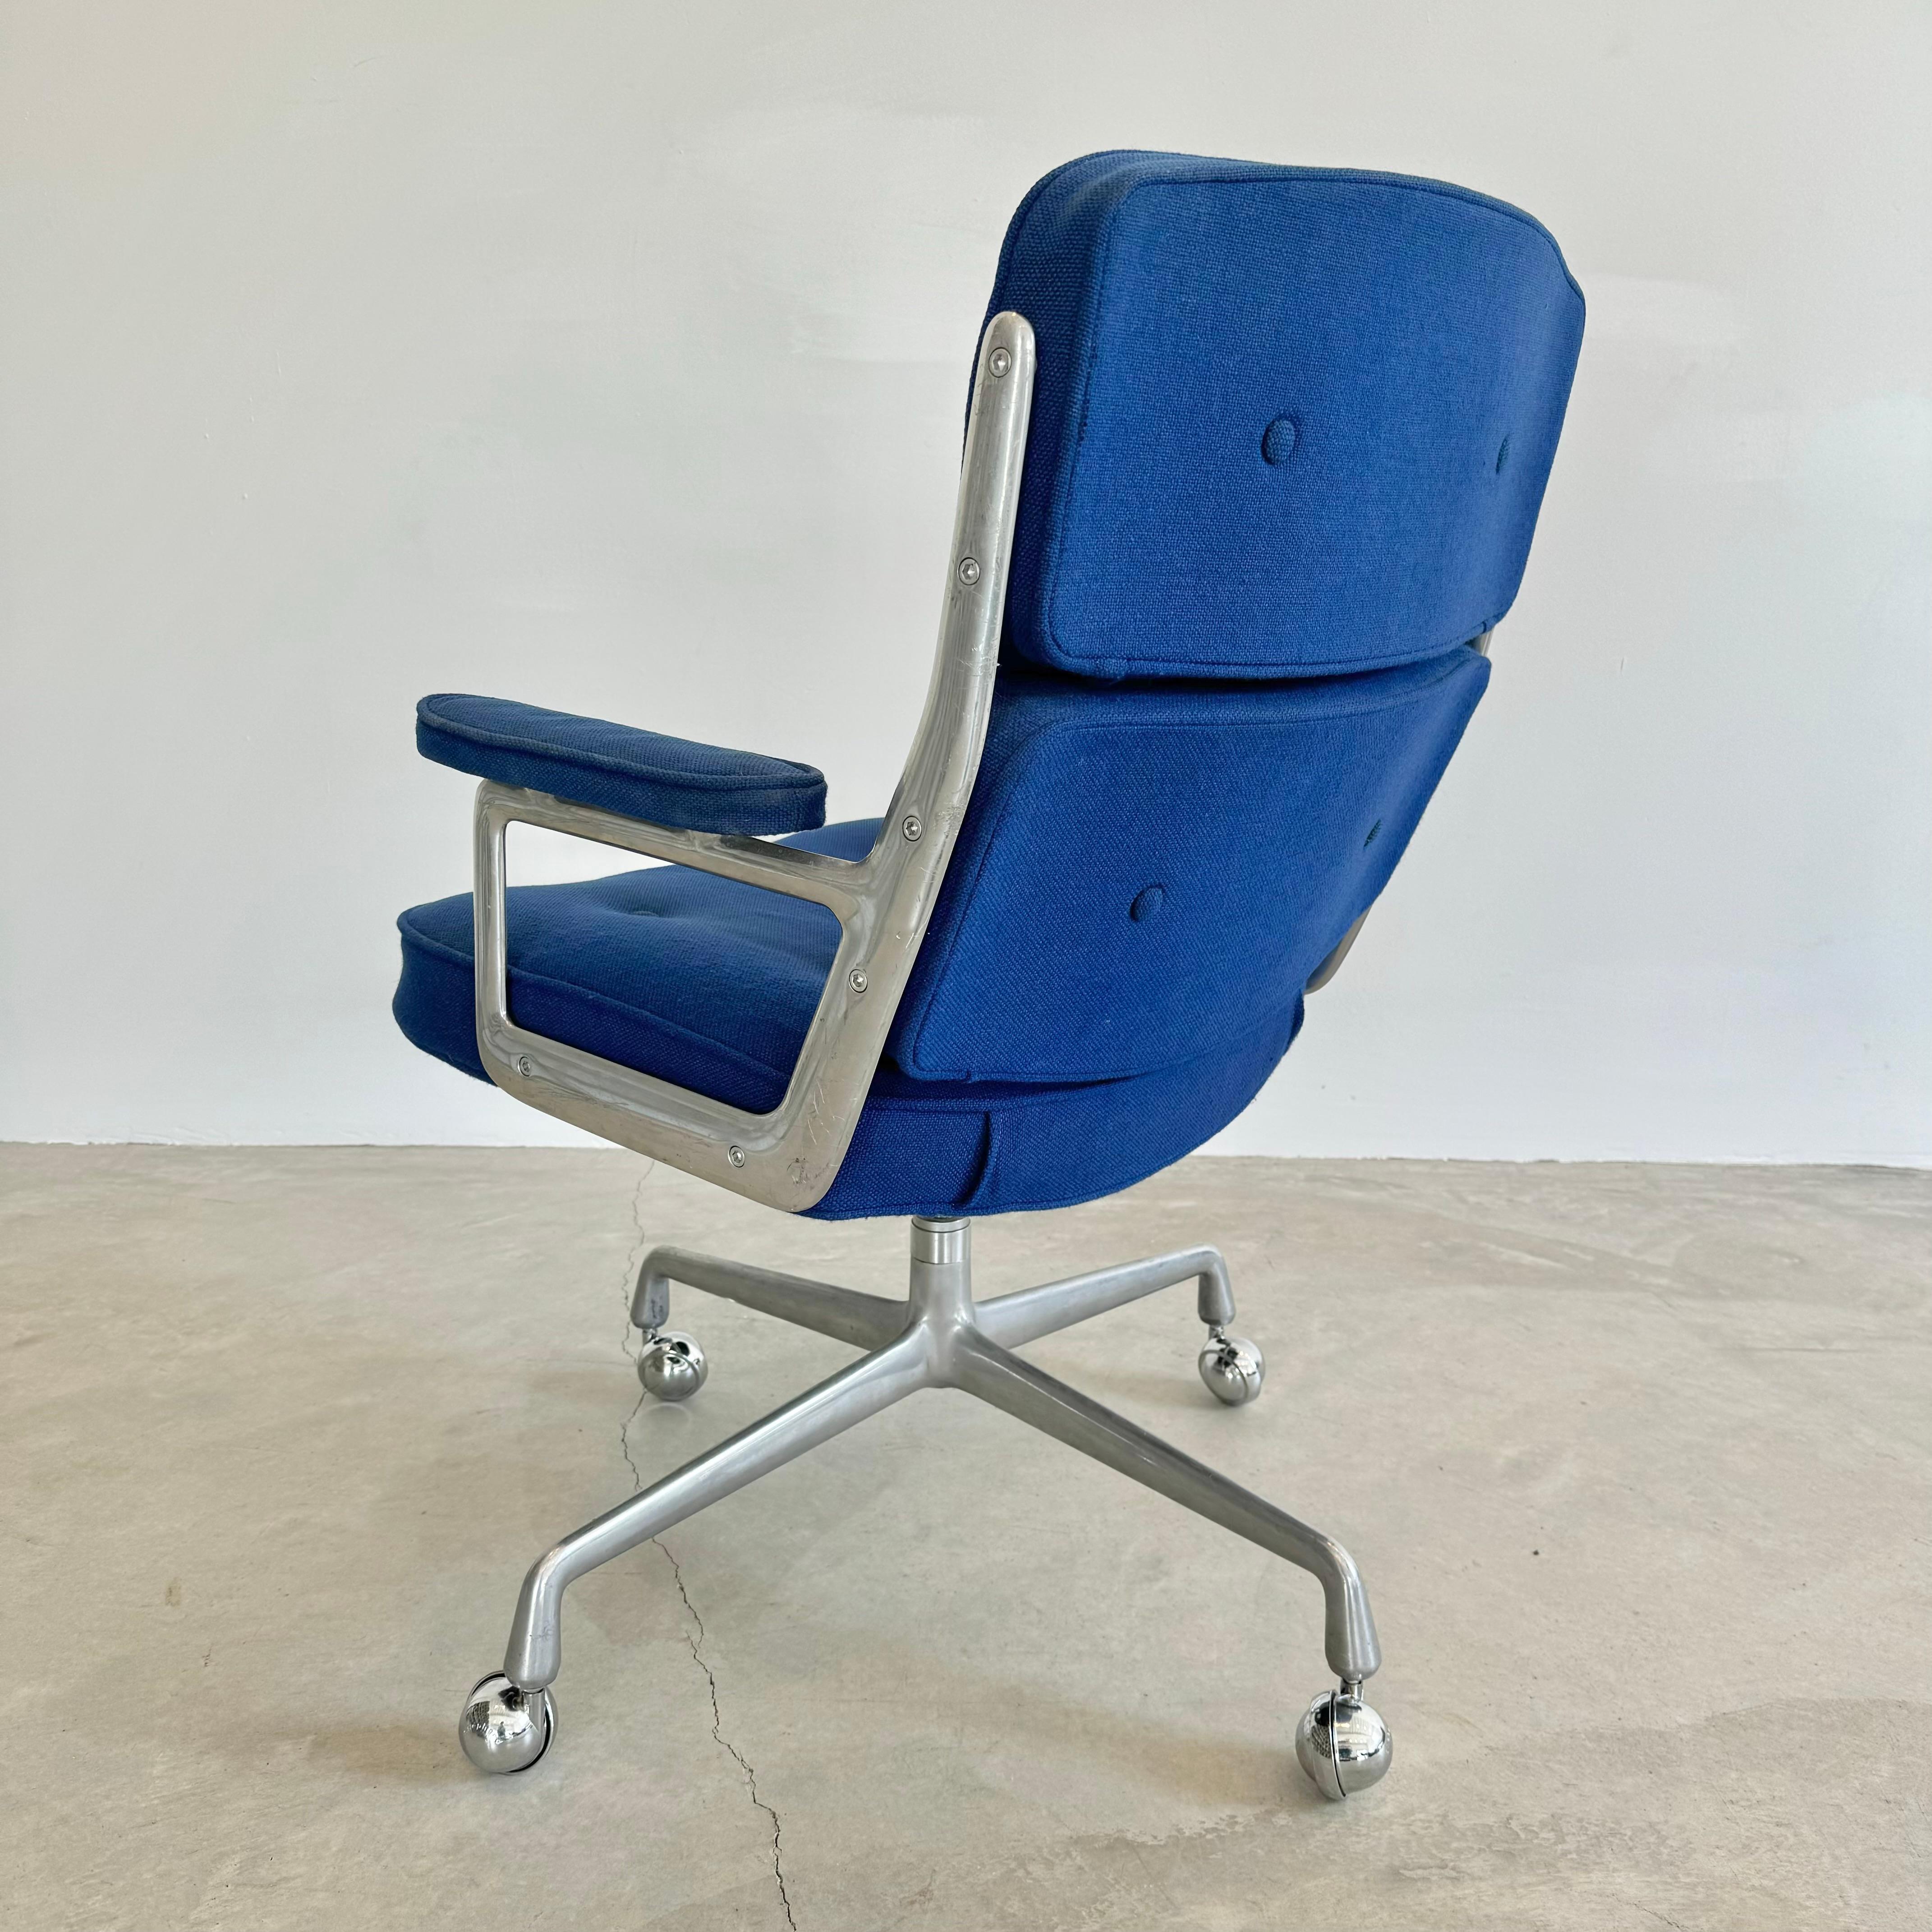 North American Eames Time Life Chair in Navy Blue Burlap for Herman Miller, 1978 USA For Sale